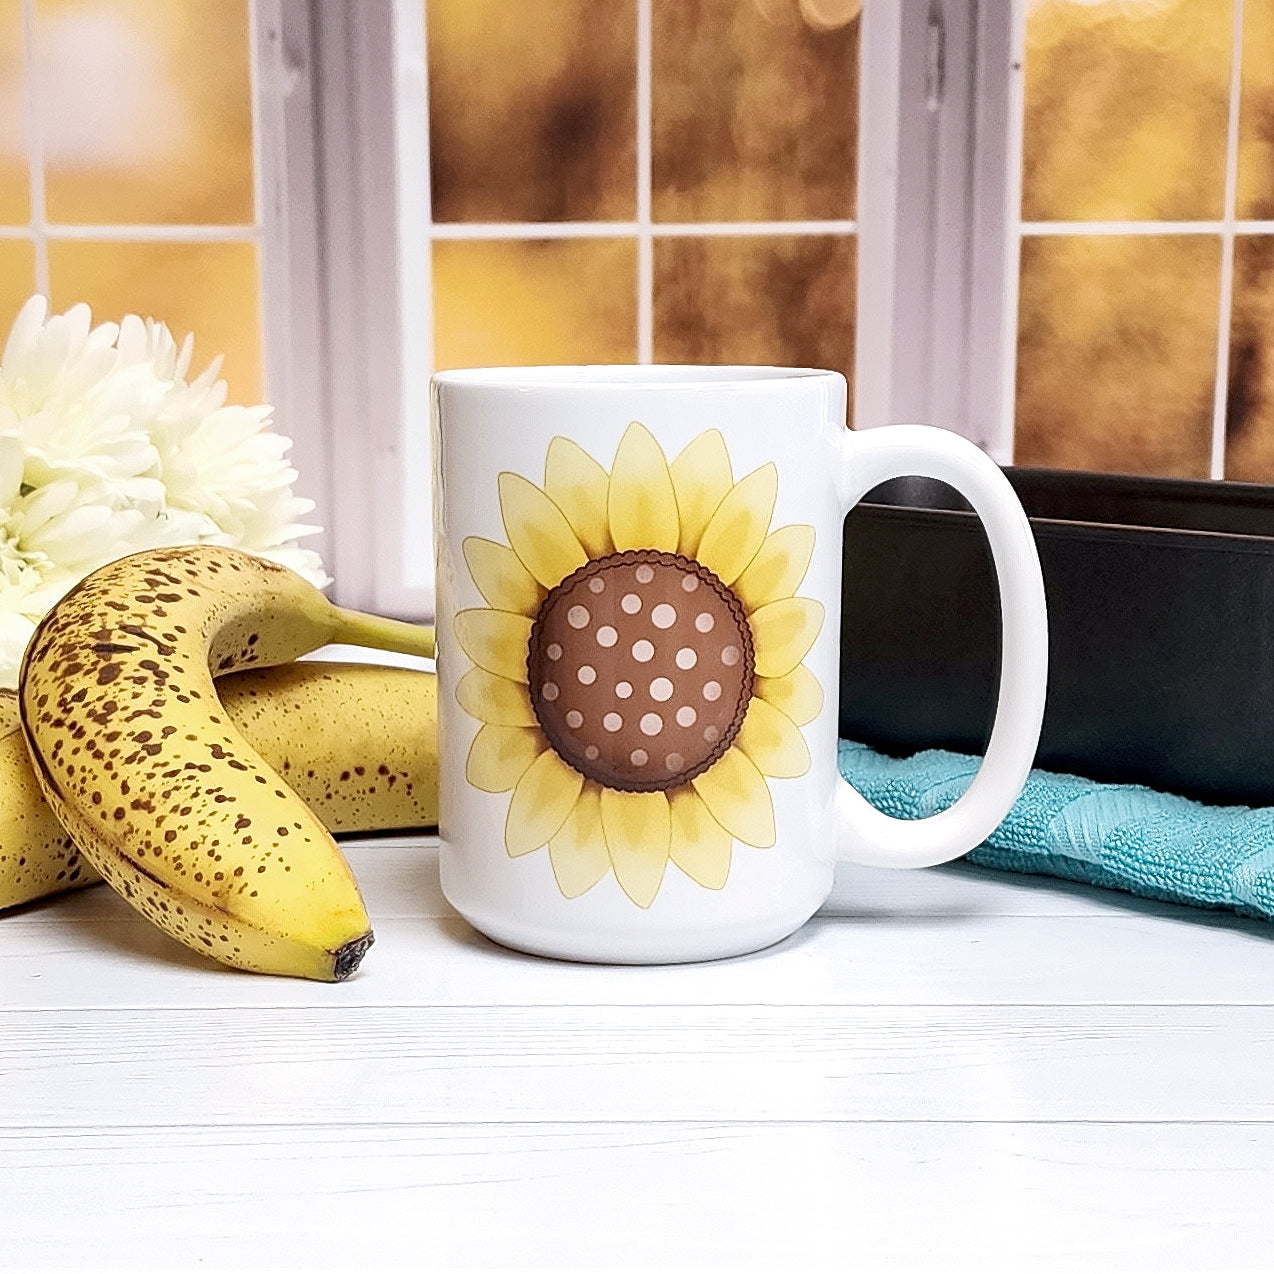 Cute 15oz sunflower mug on a table with bananas and a bread pan in front a fall window scene.